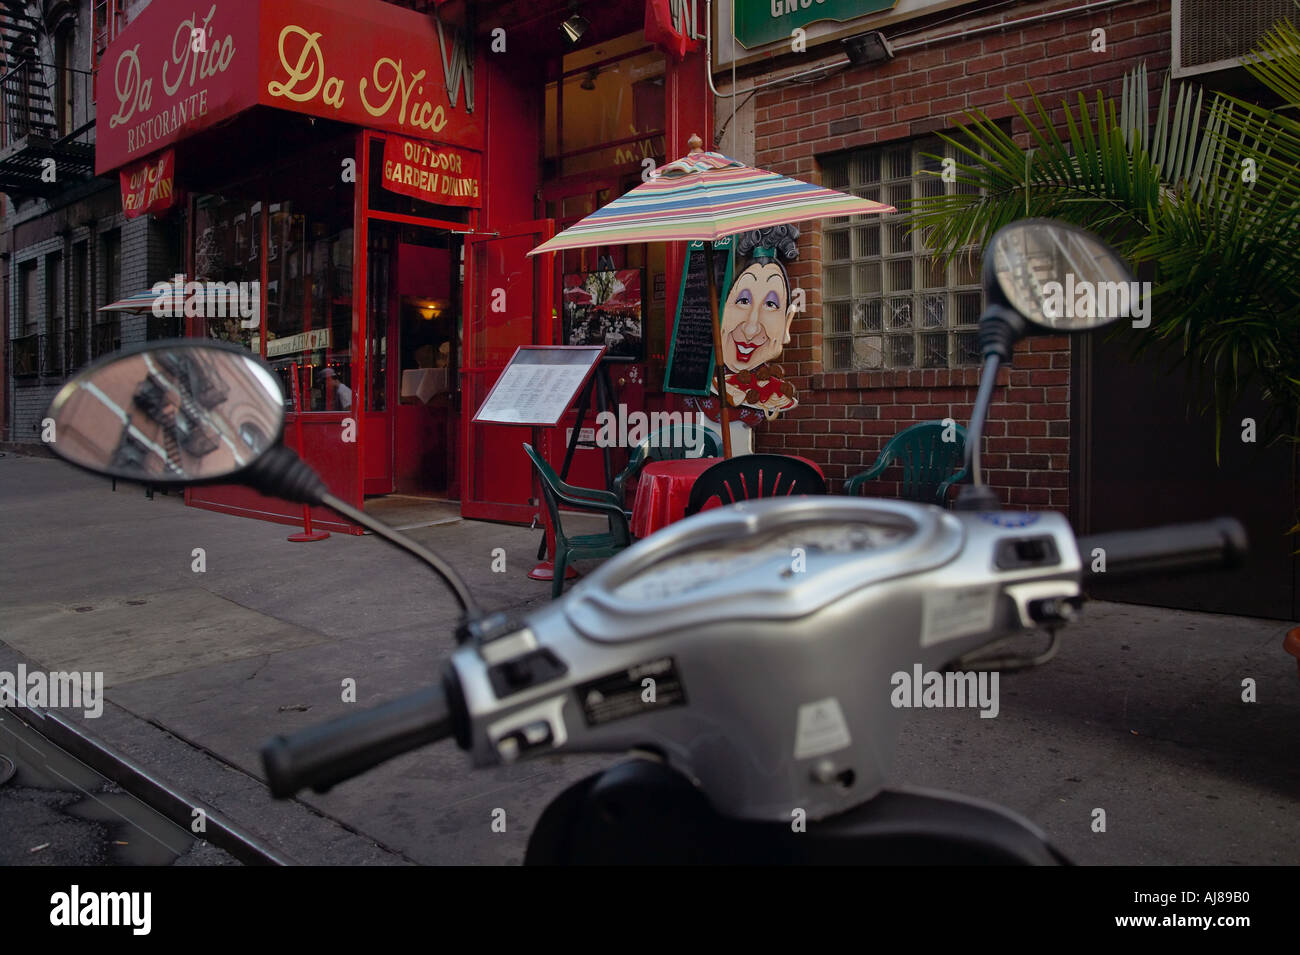 Italijet motor scooter parked in front of Da Nico Ristorante Mulberry Street in Little Italy New York NY Stock Photo